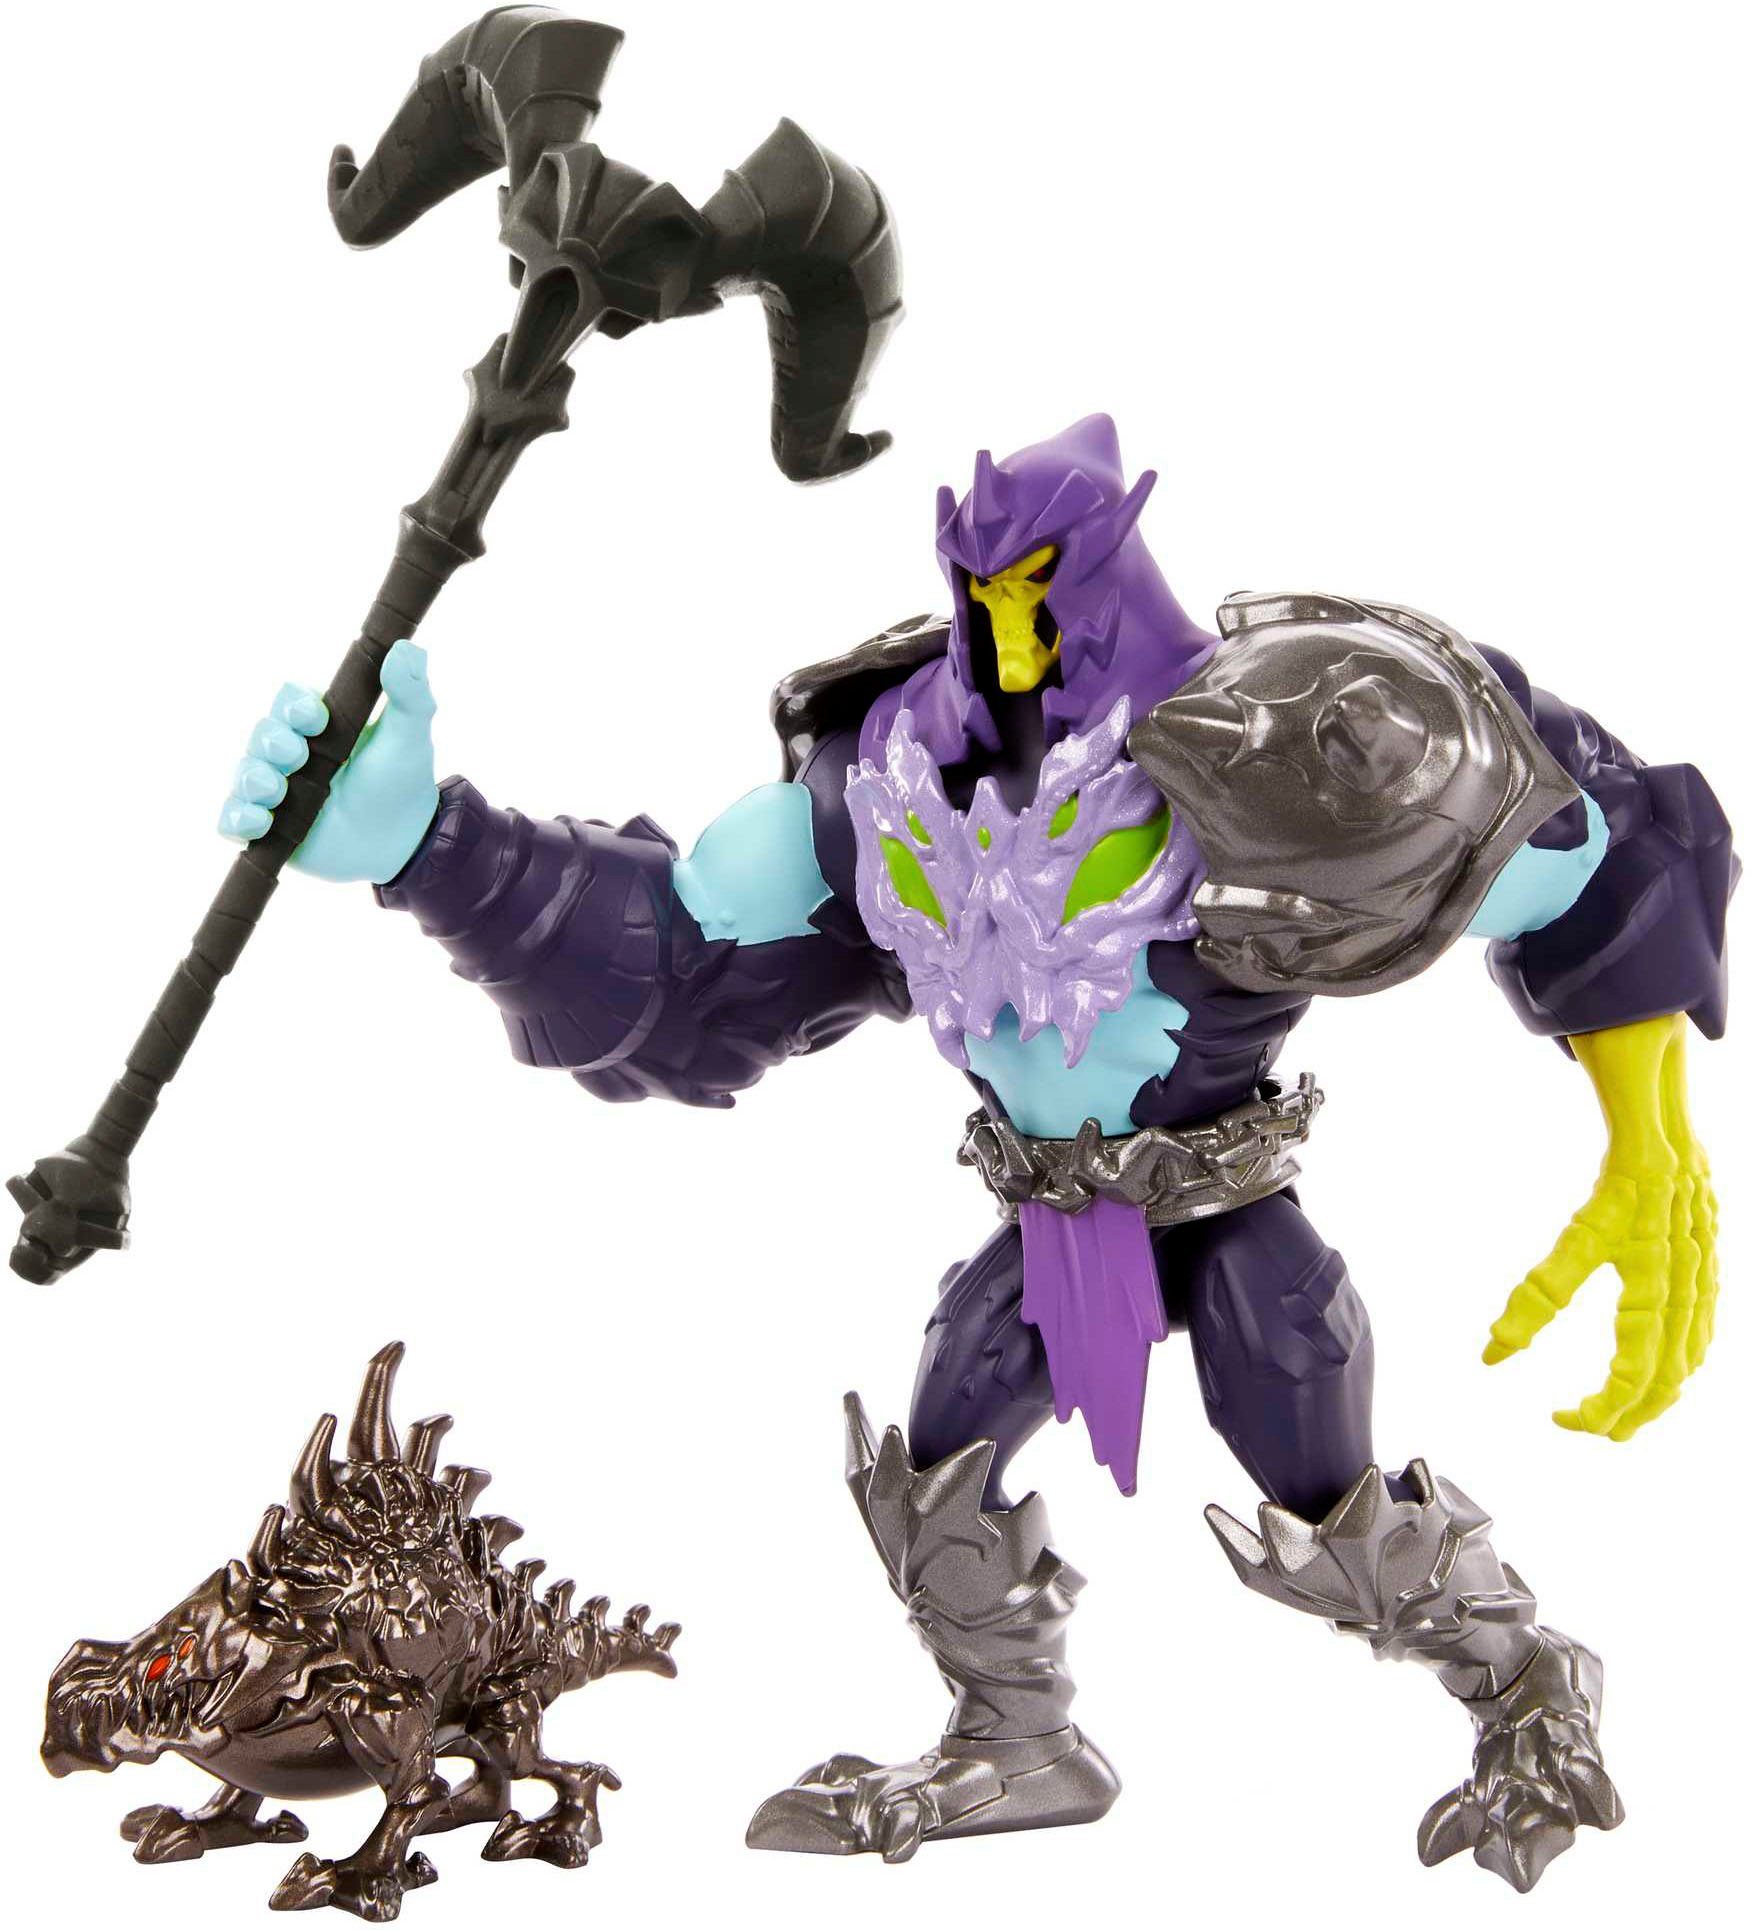 and Masters Savage Skeletor Actionfigur Universe, of the The Mattel® Eternia, He-Man